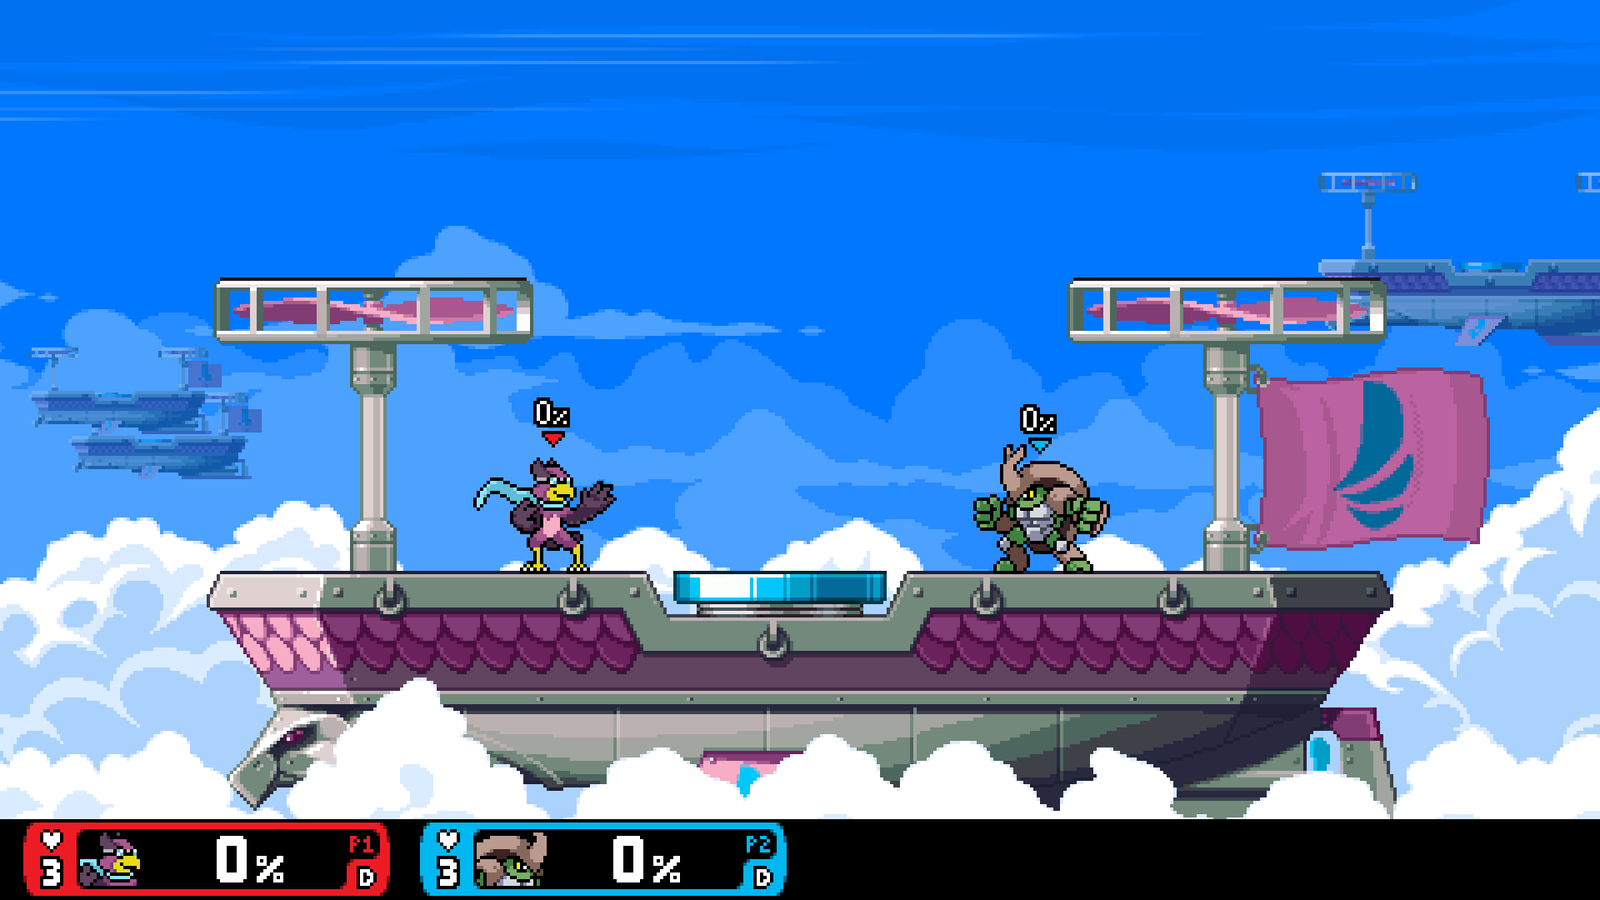 spamton rivals of aether